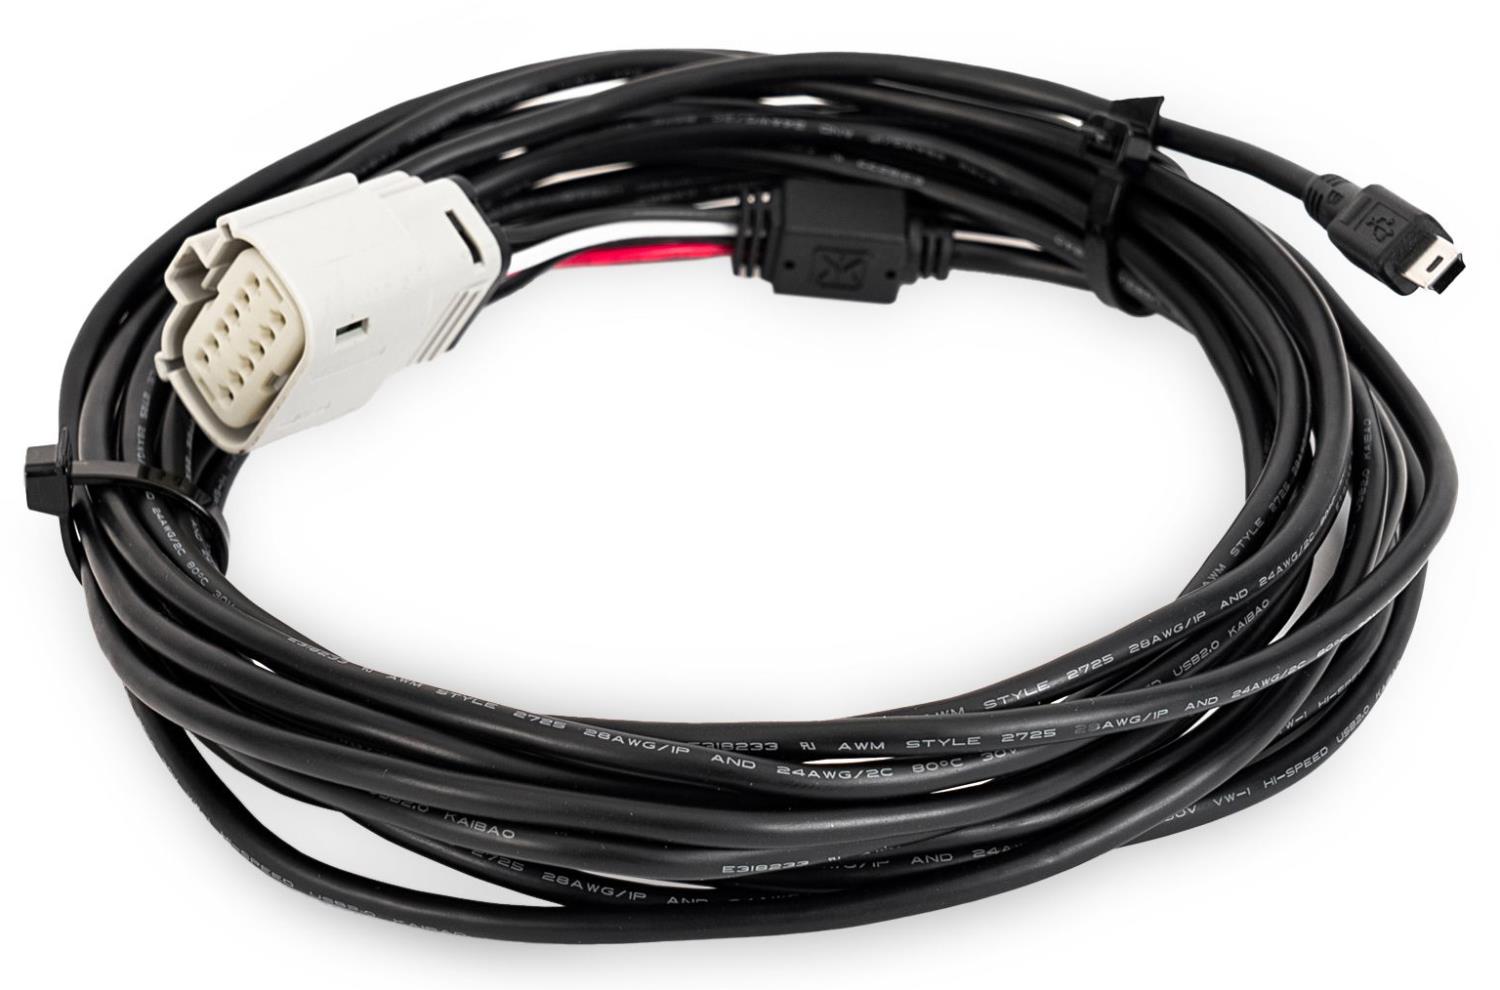 USB Wiring Harness for TouchPad+, 20 ft. Length,